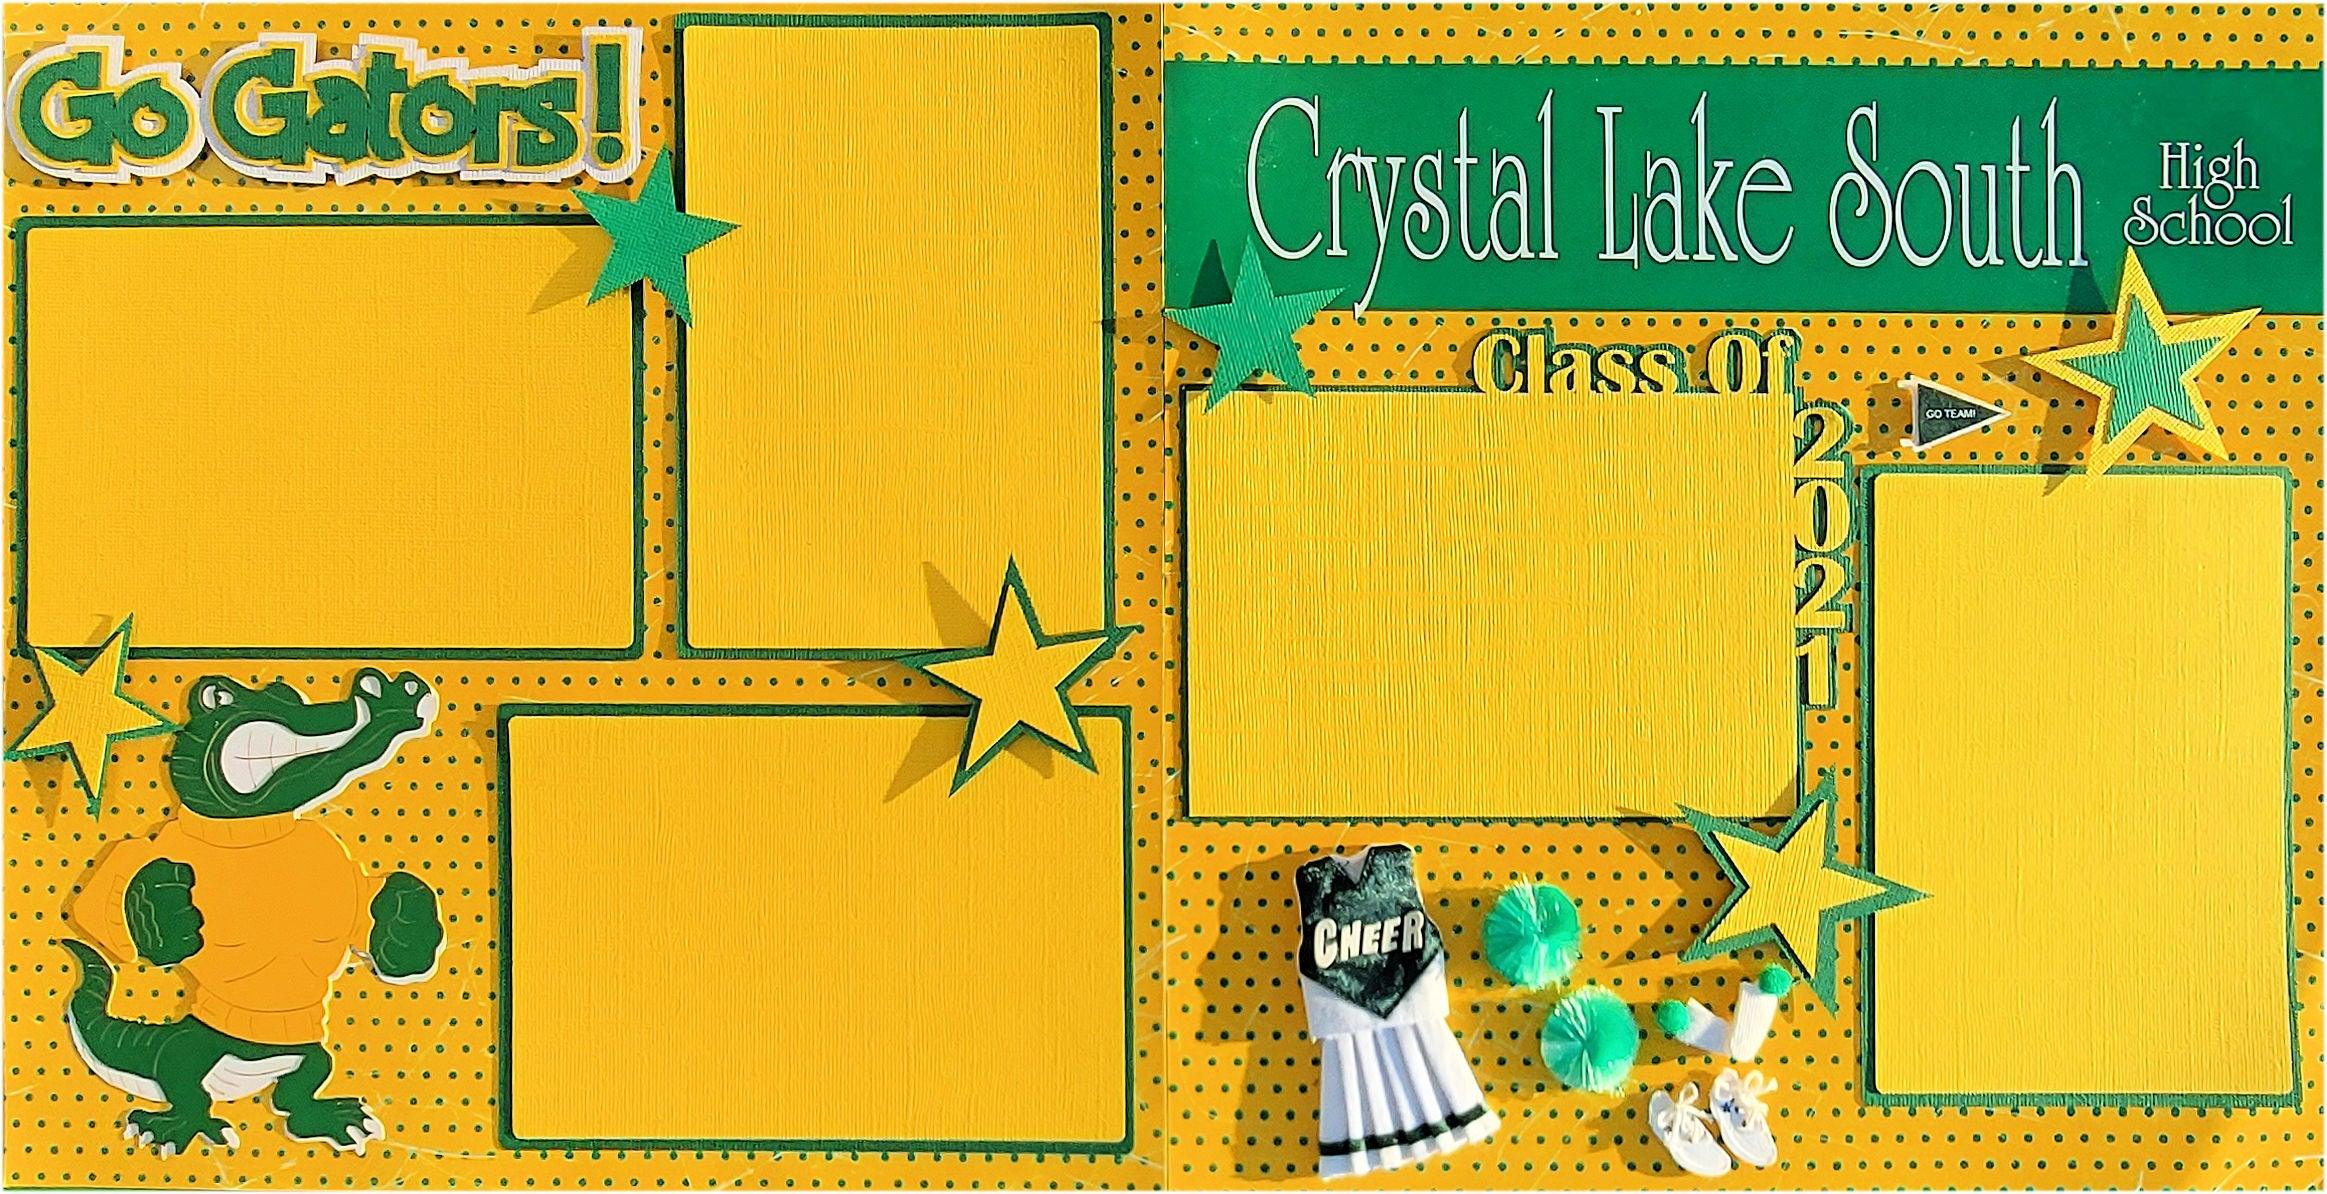 Crystal Lake South Class of 2021 Cheer (2) - 12 x 12 Pages, Fully-Assembled & Hand-Crafted 3D Scrapbook Premade by SSC Designs